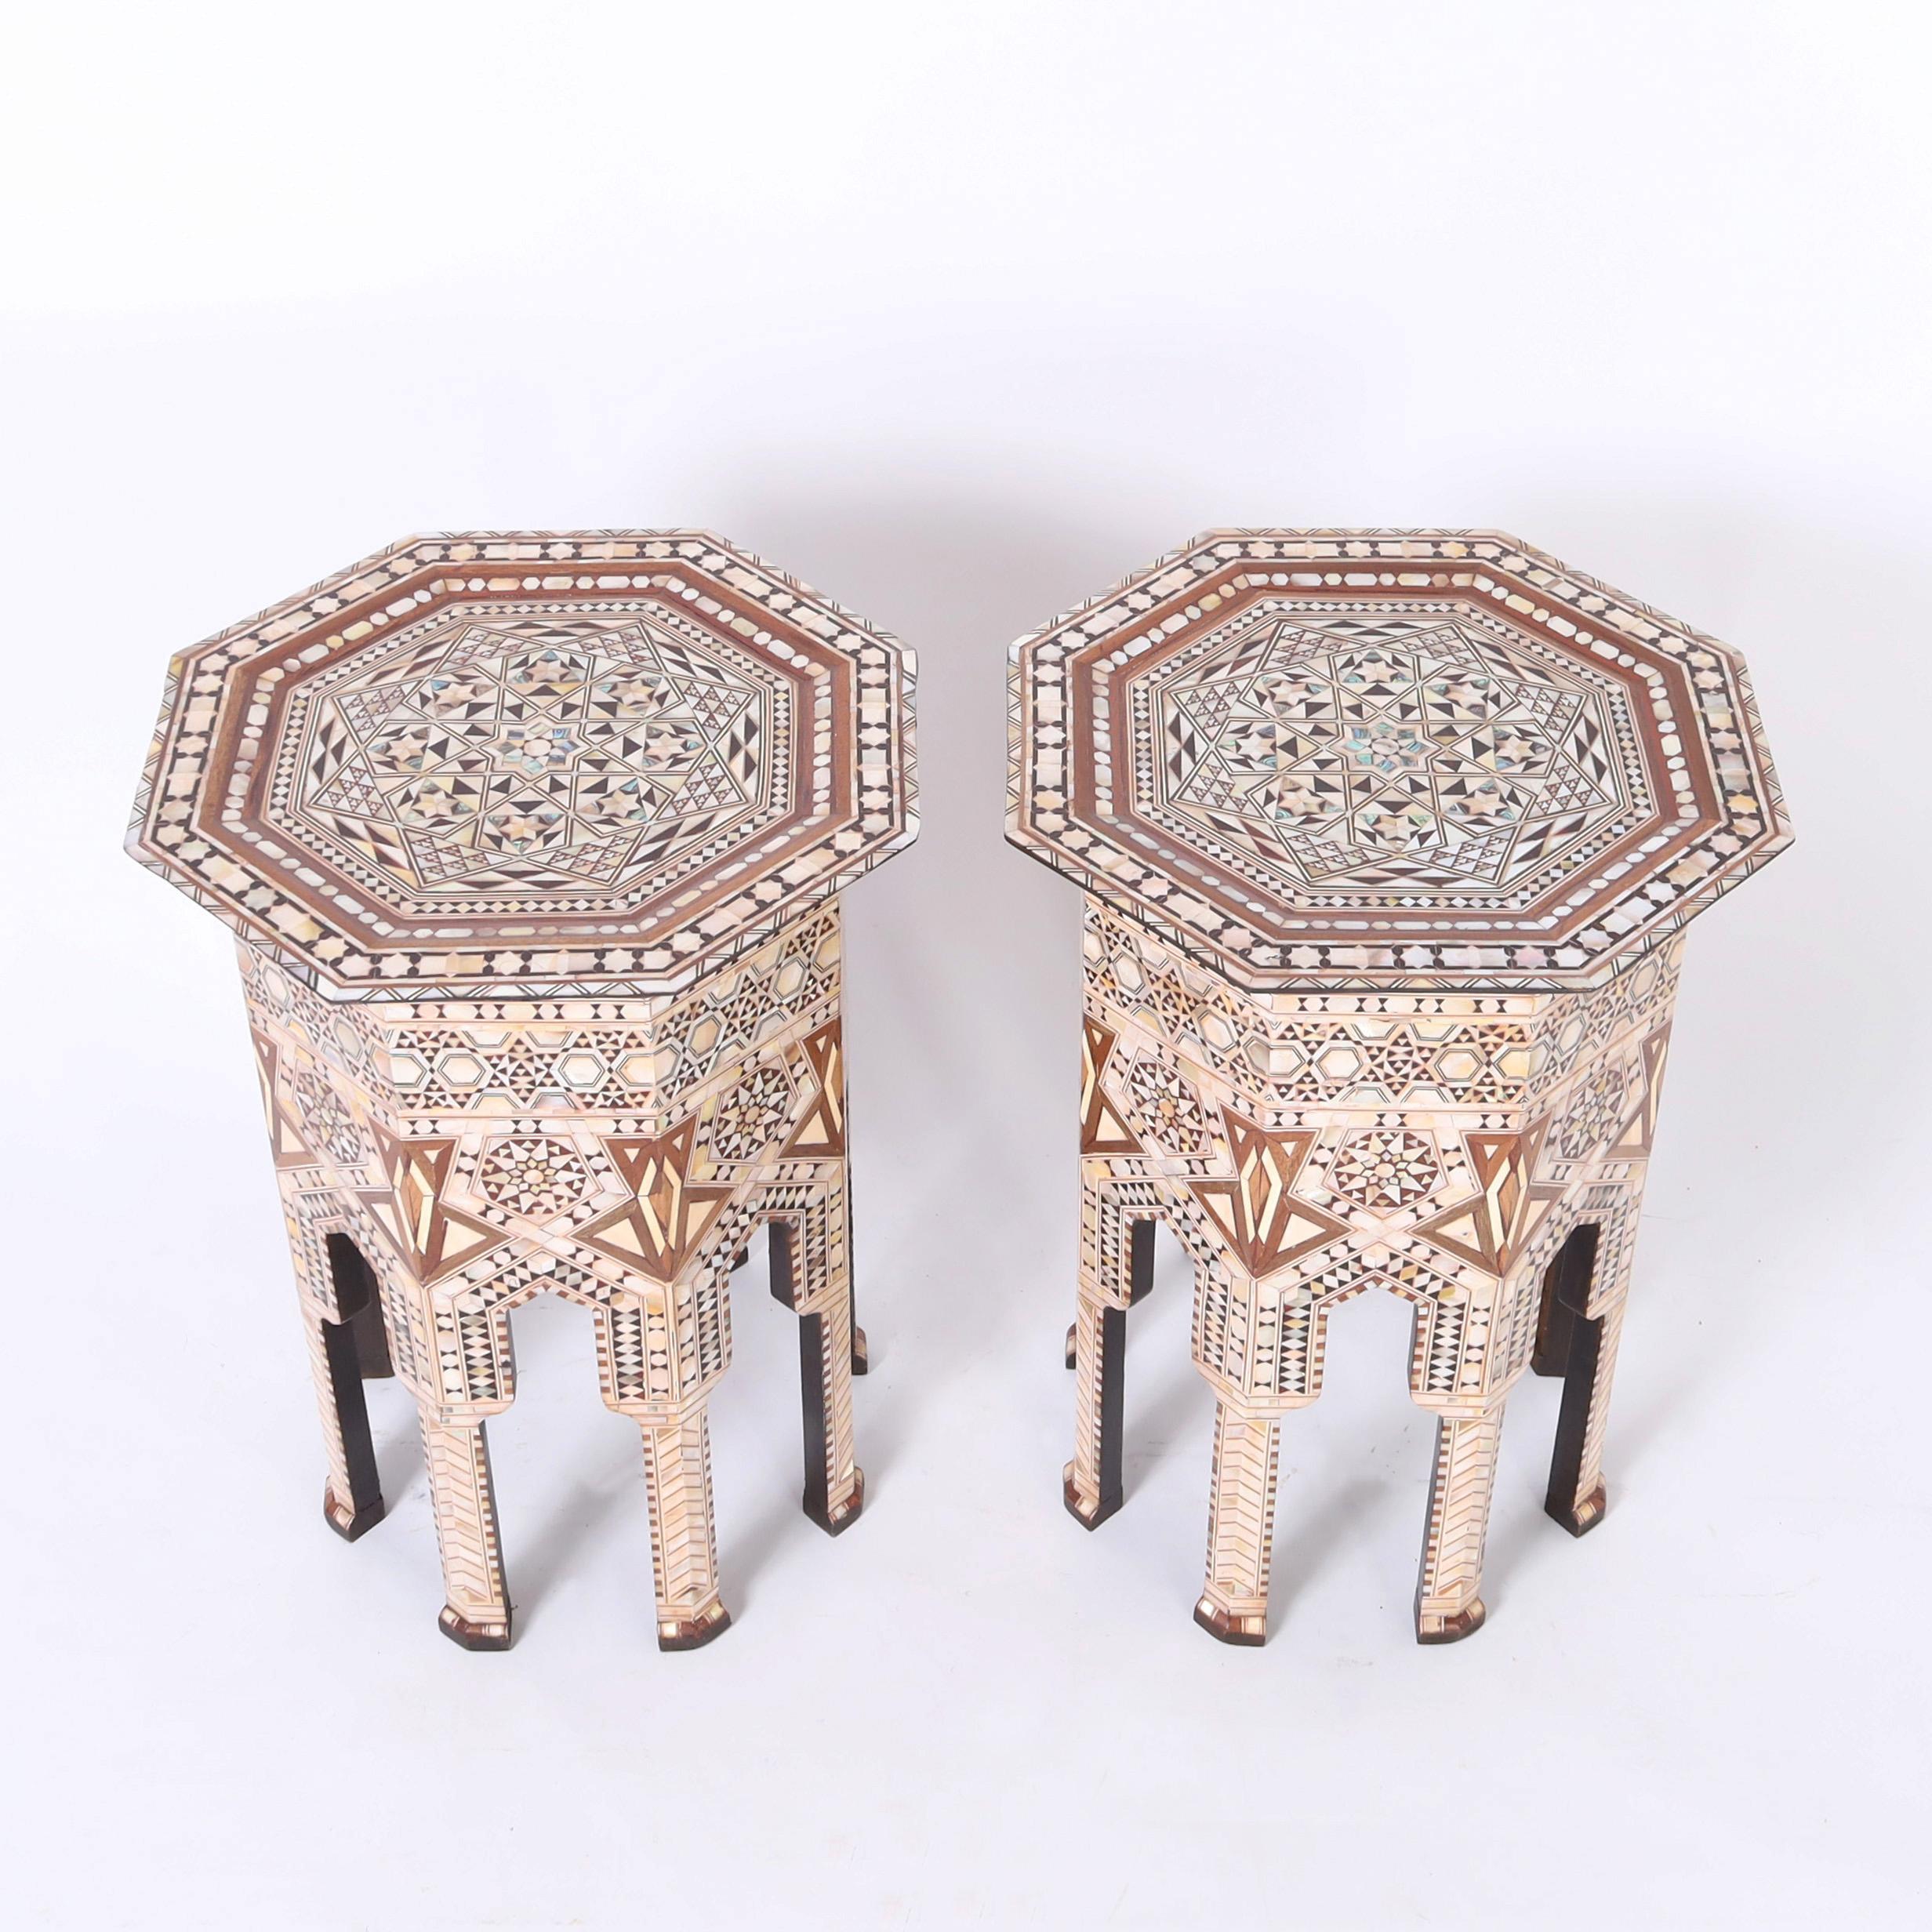 Standout pair of Moroccan stands crafted in mahogany in an octagon form with classic moorish arches and clad in elaborate inlaid marquetry of mother of pearl, abalone, ebony, walnut and bone in geometric designs.